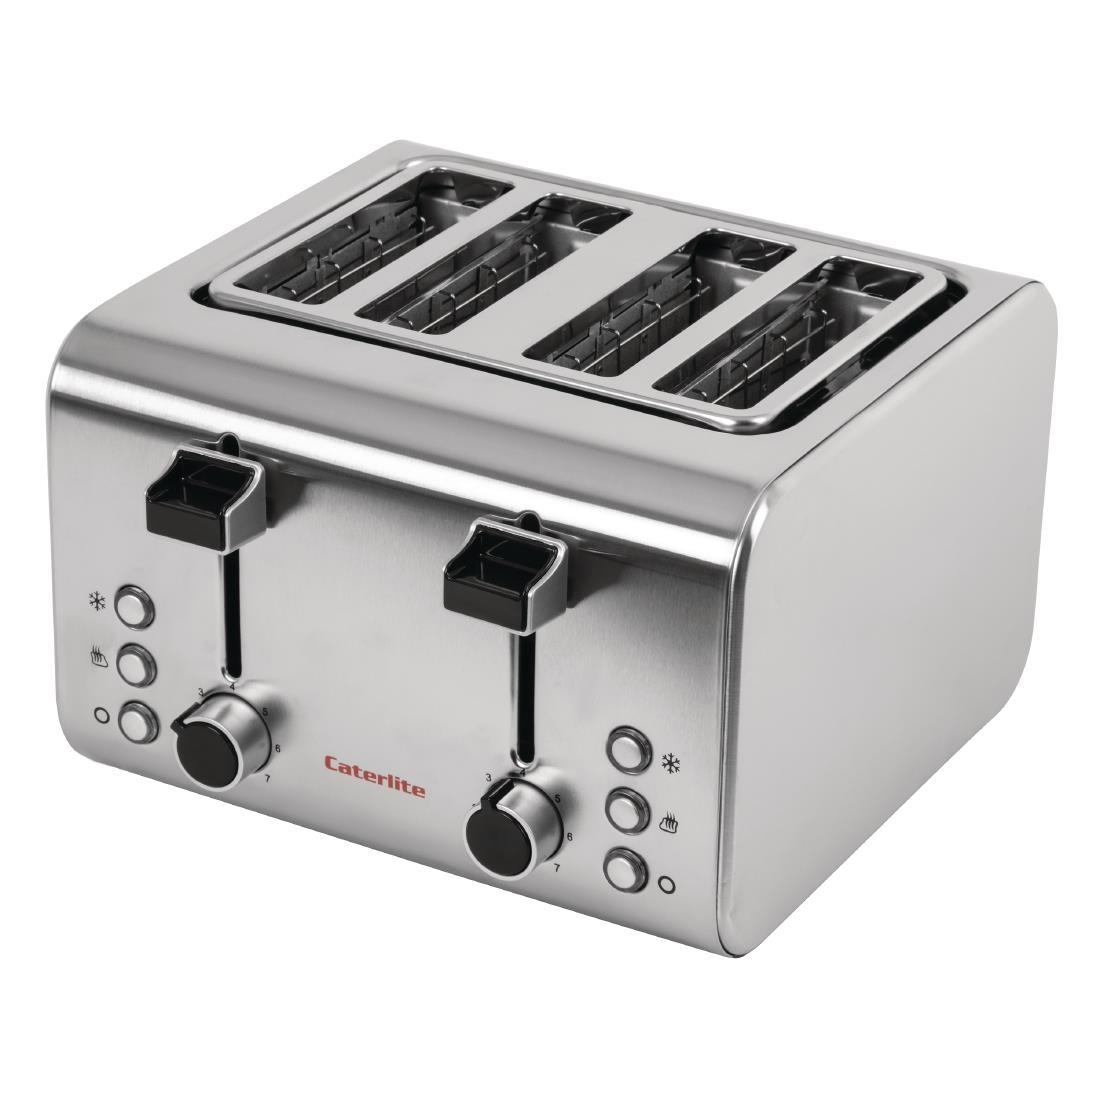 Caterlite 4 Slot Stainless Steel Toaster - CP929  - 3